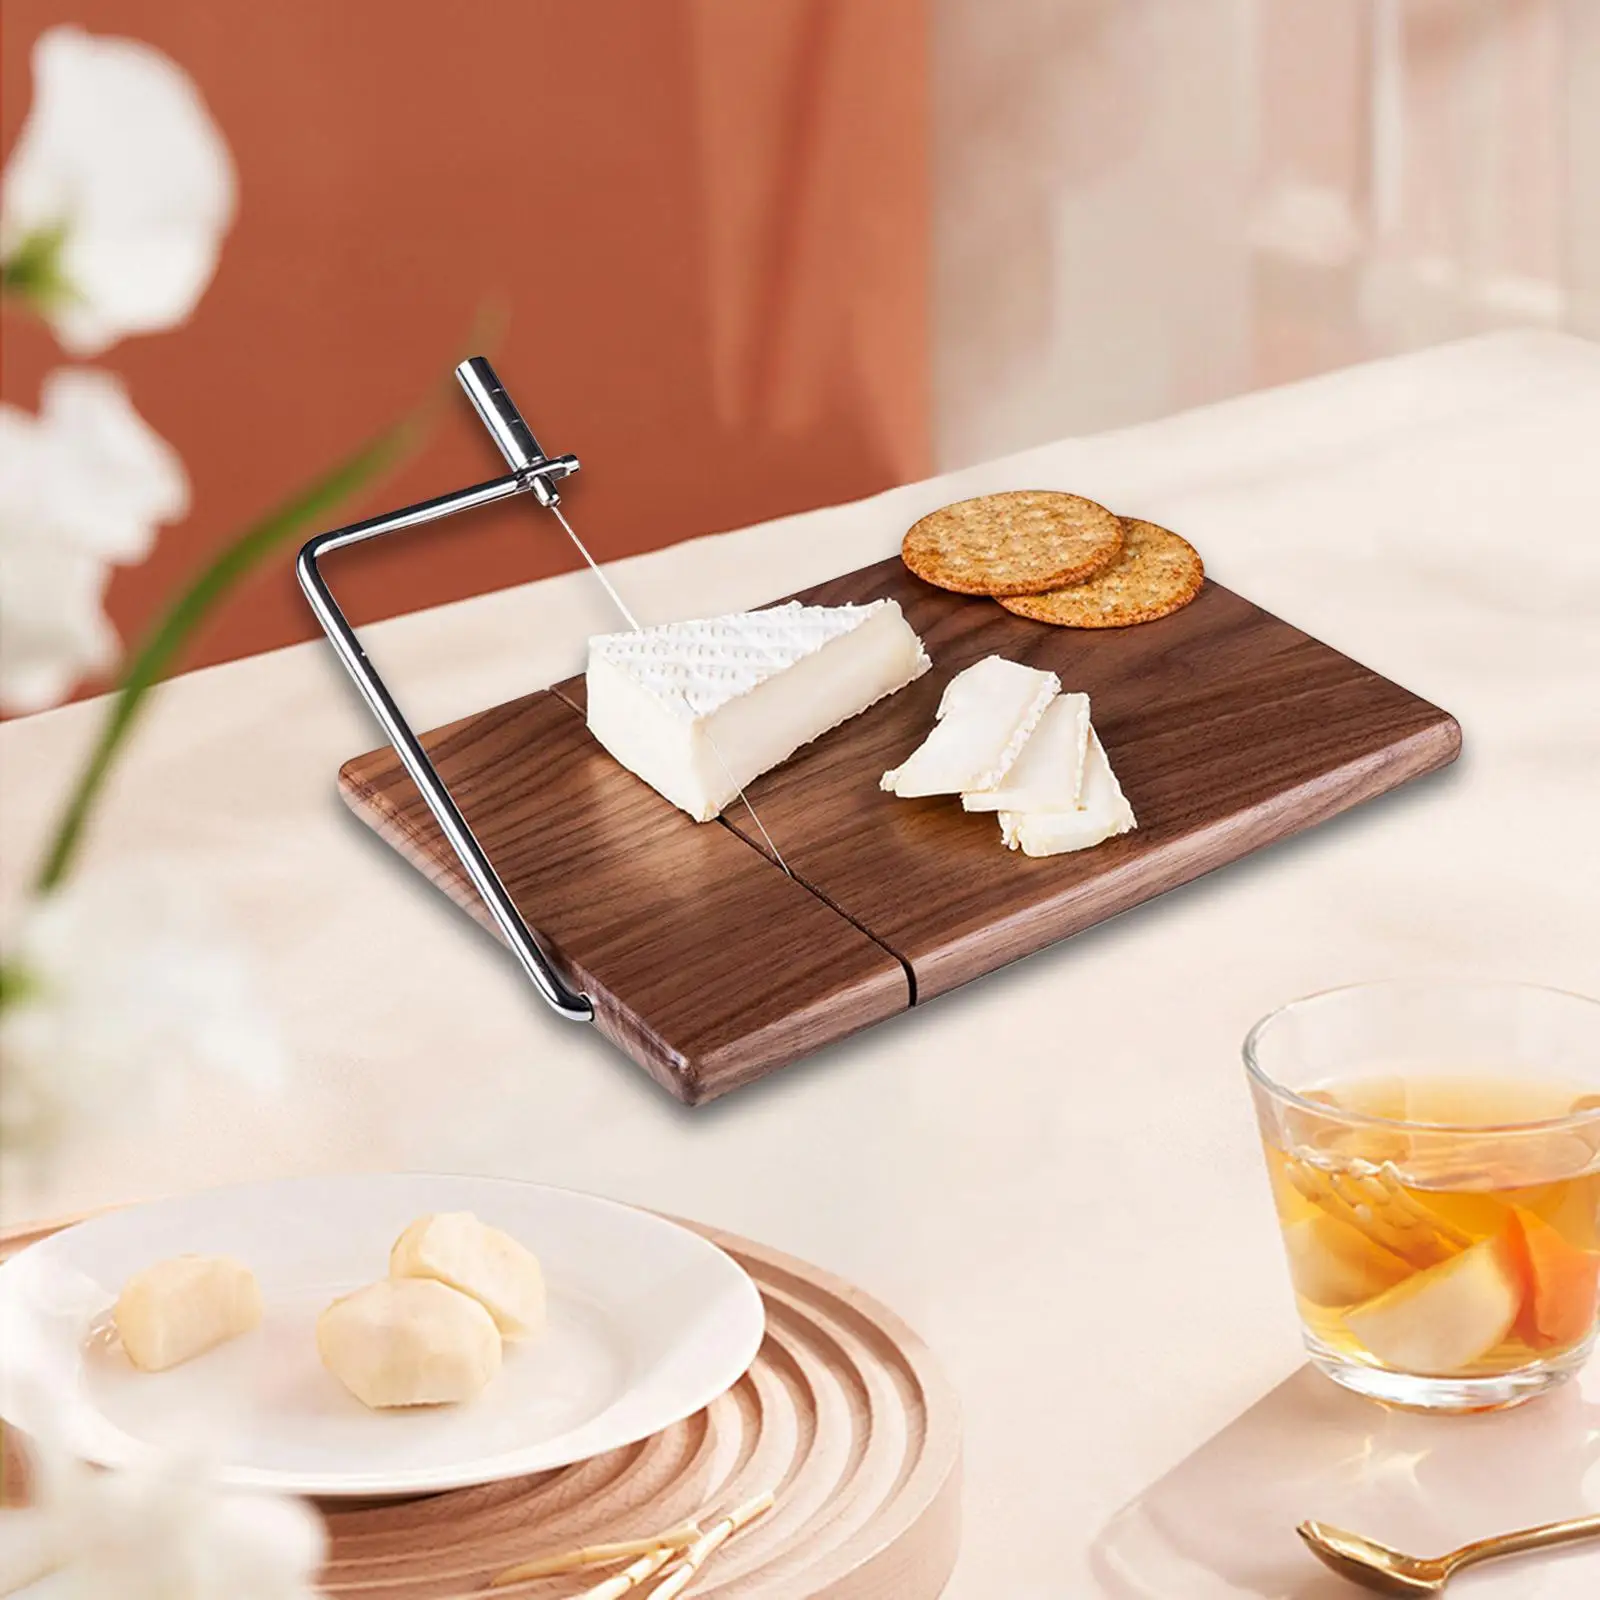 Wood Serving Board with Cheese Slicer Butter Dessert Food Slicer for Vegetables Handcrafted Soaps Tofu Butter Housewarming Gifts